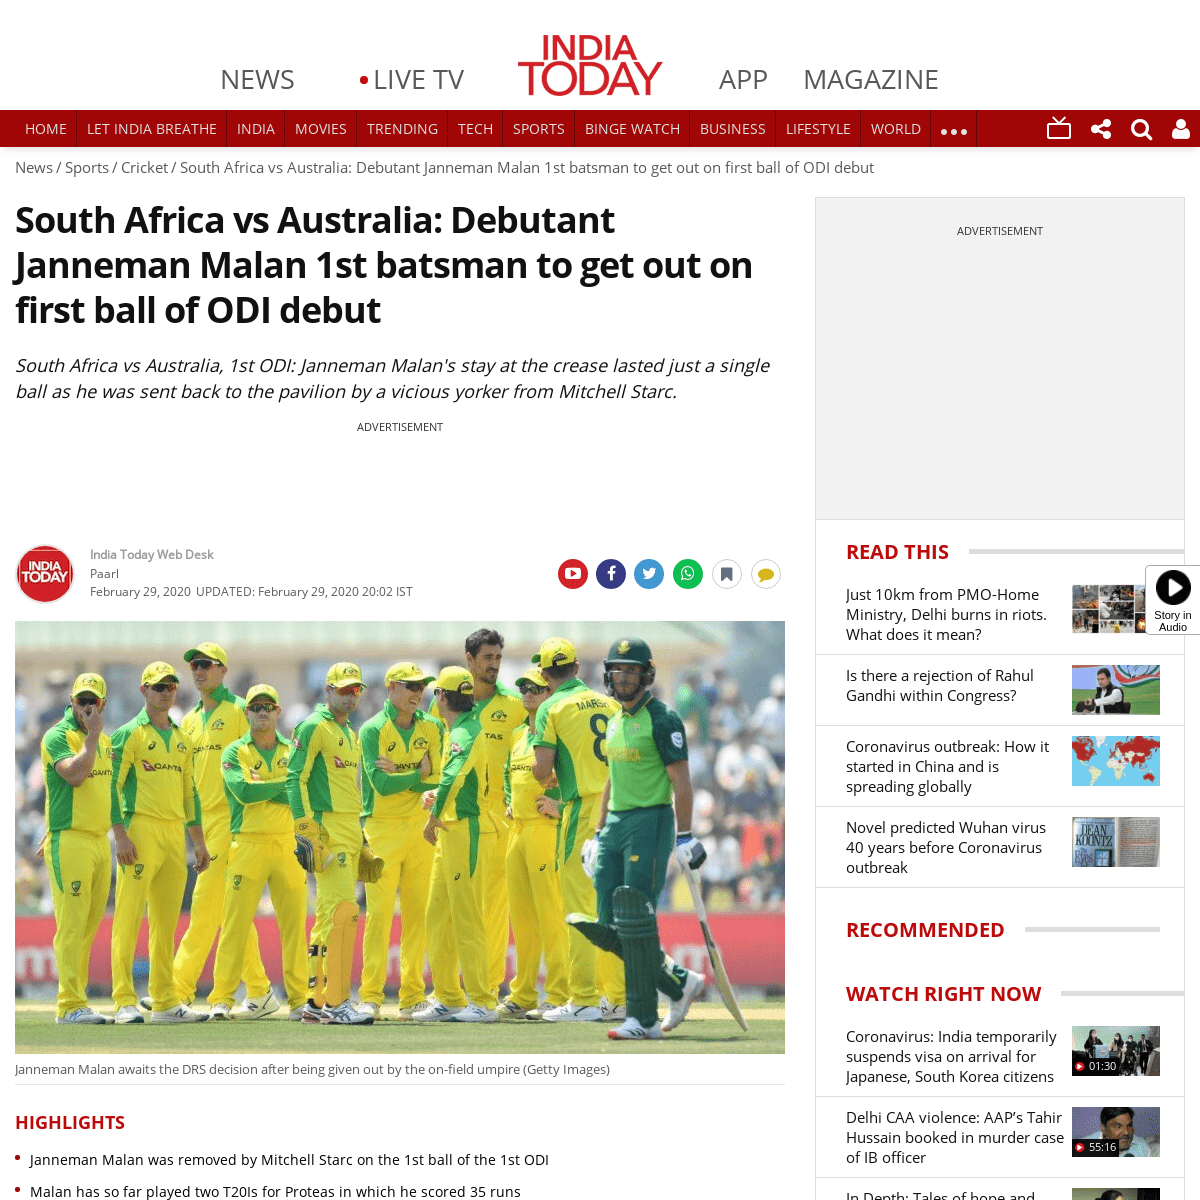 A complete backup of www.indiatoday.in/sports/cricket/story/south-africa-vs-australia-1st-odi-janneman-malan-debut-out-1st-ball-